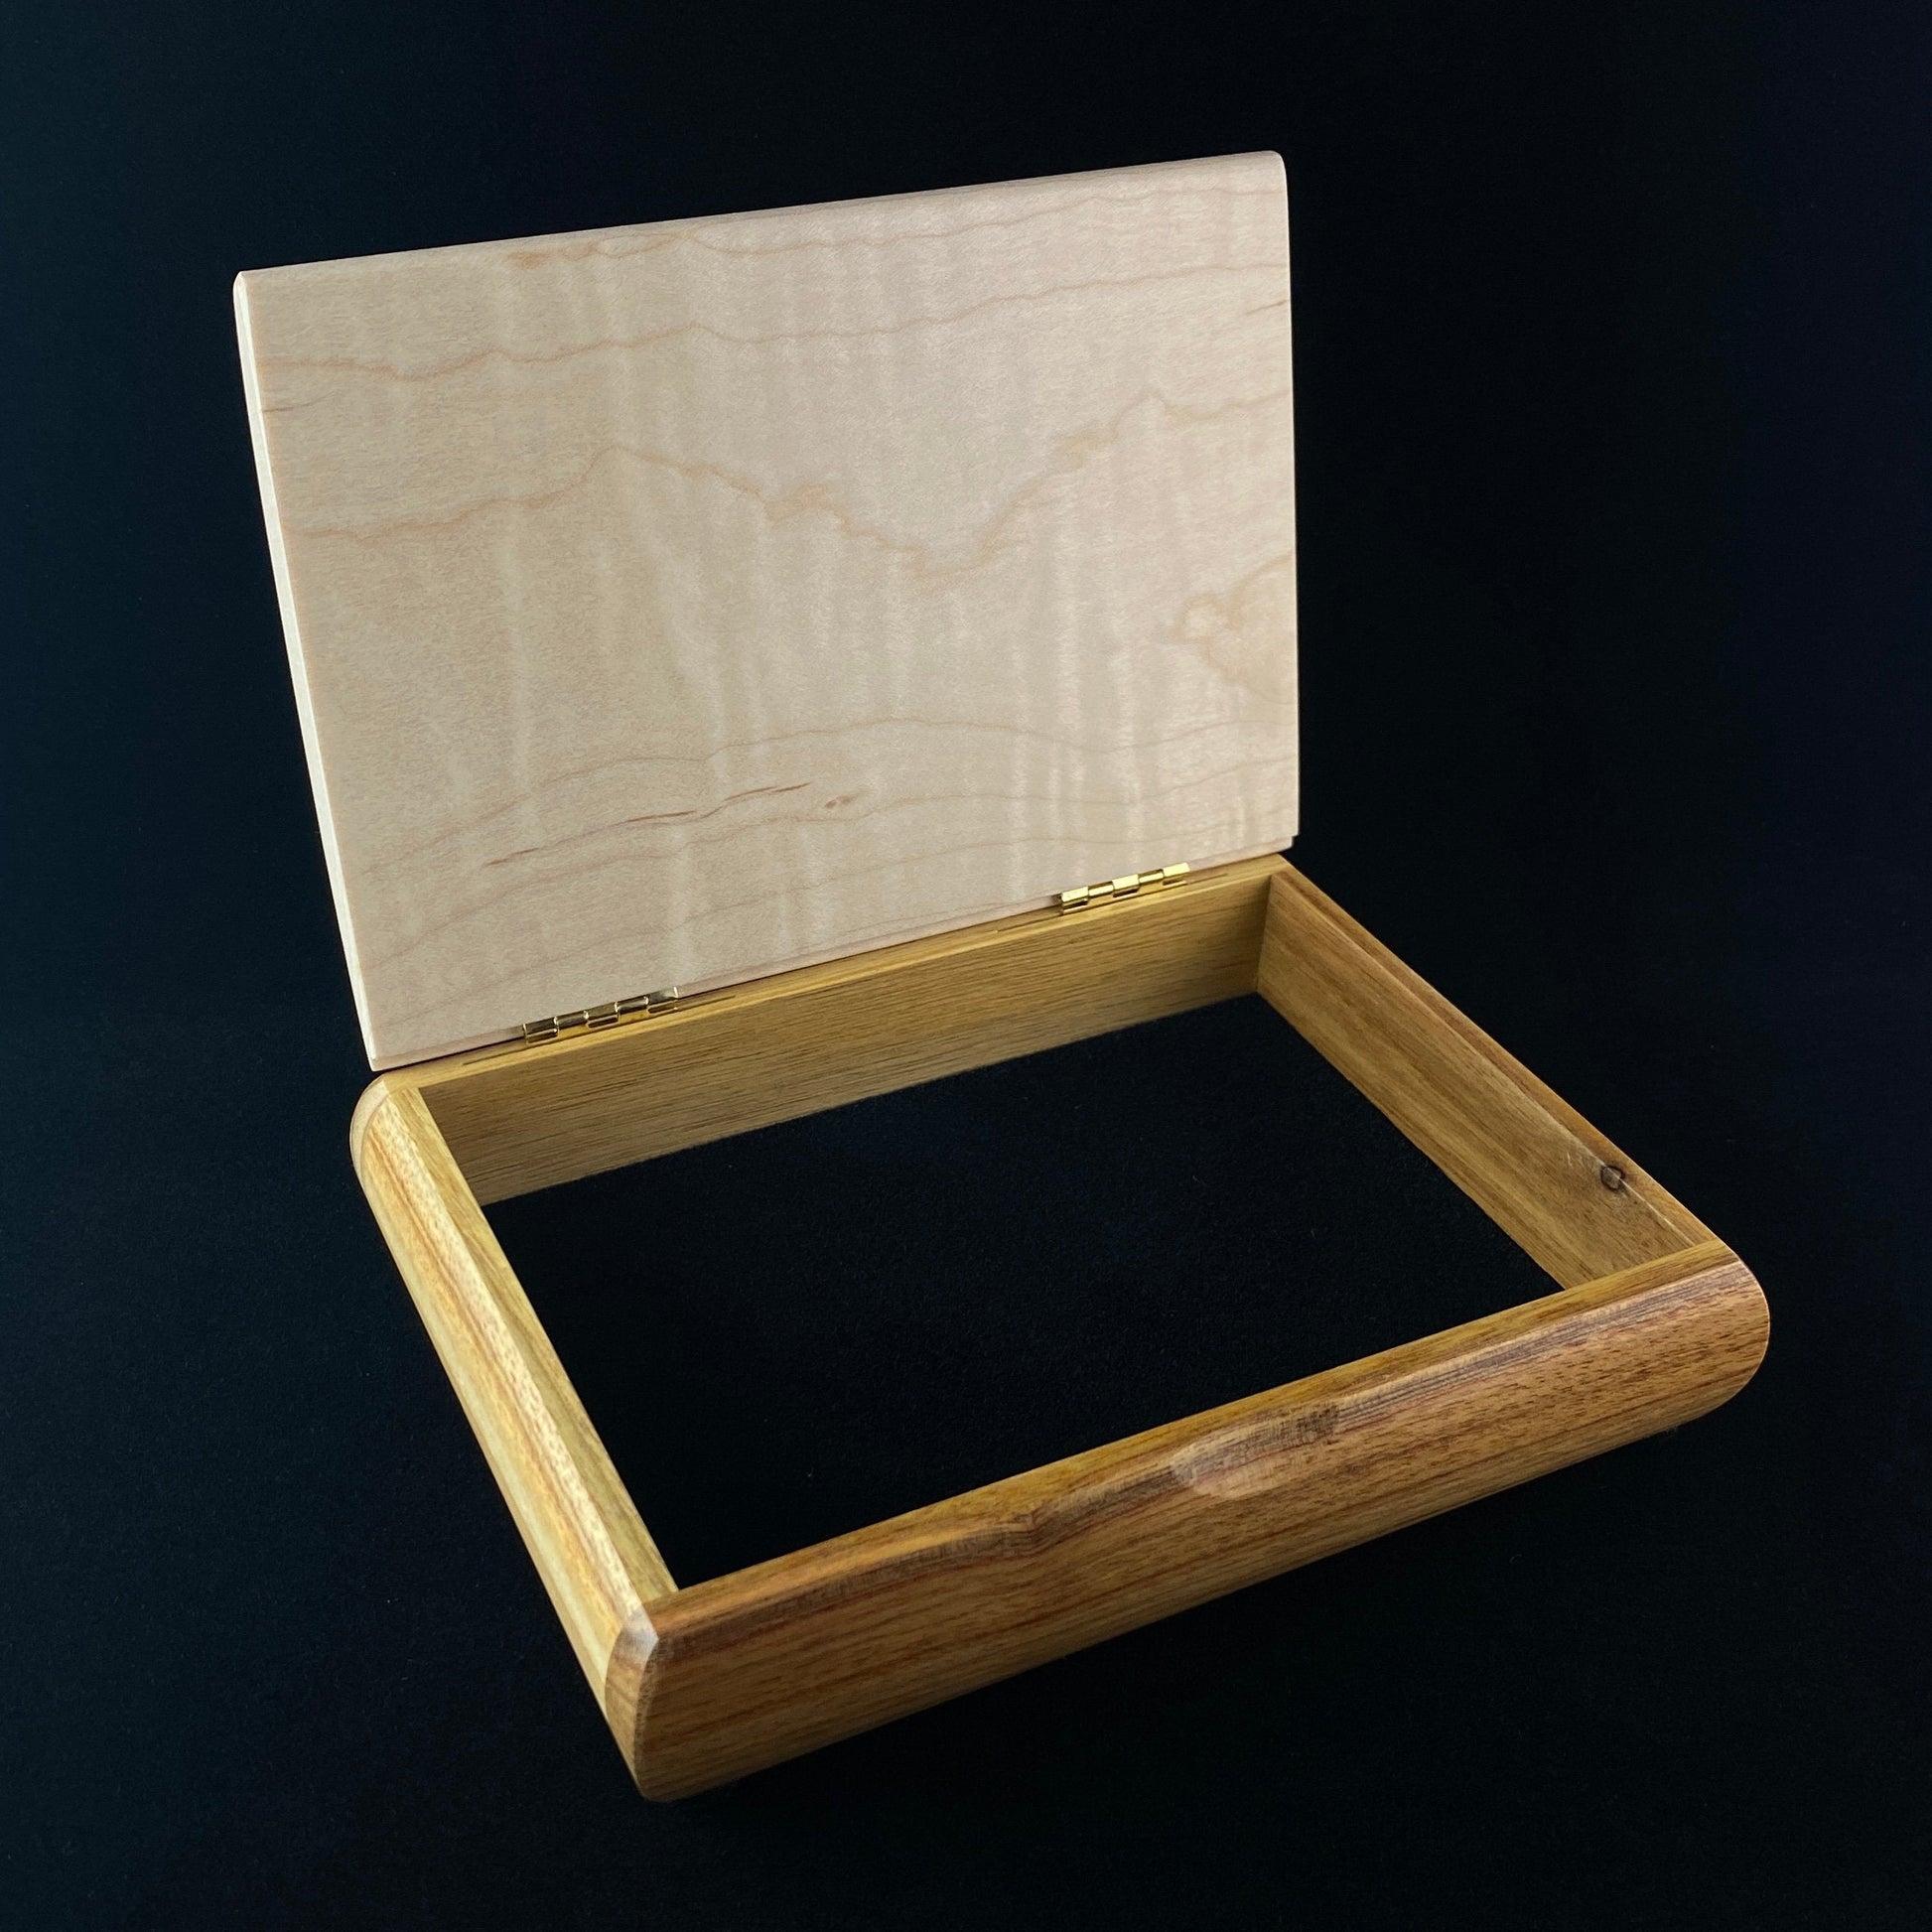 Handmade Wooden Jewelry Box - Canarywood and Curly Maple